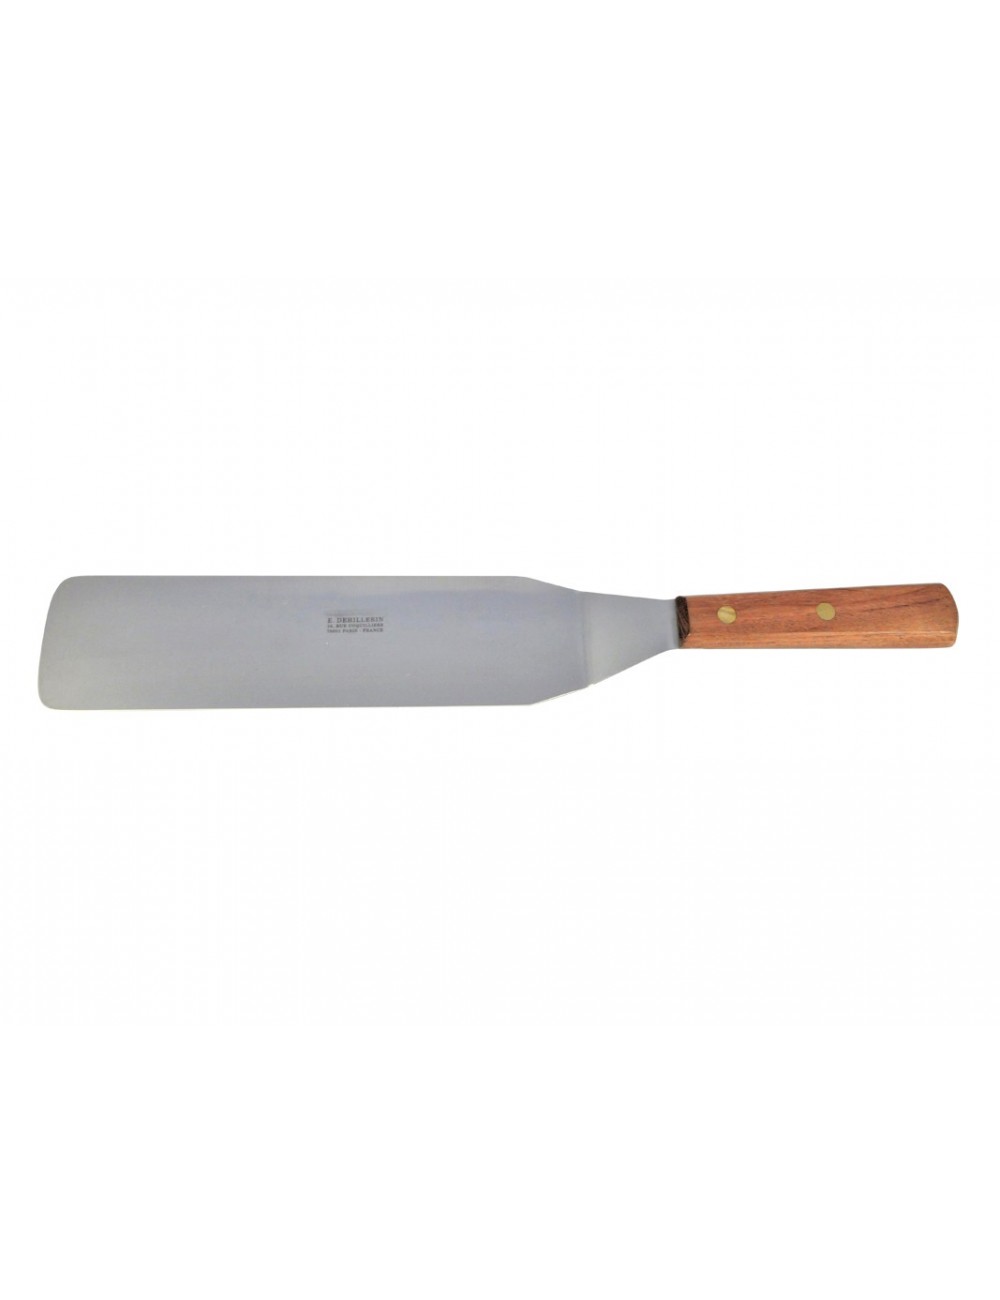 STAINLESS STEEL CURVED SPATULA - PURCHASE OF KITCHEN UTENSILS